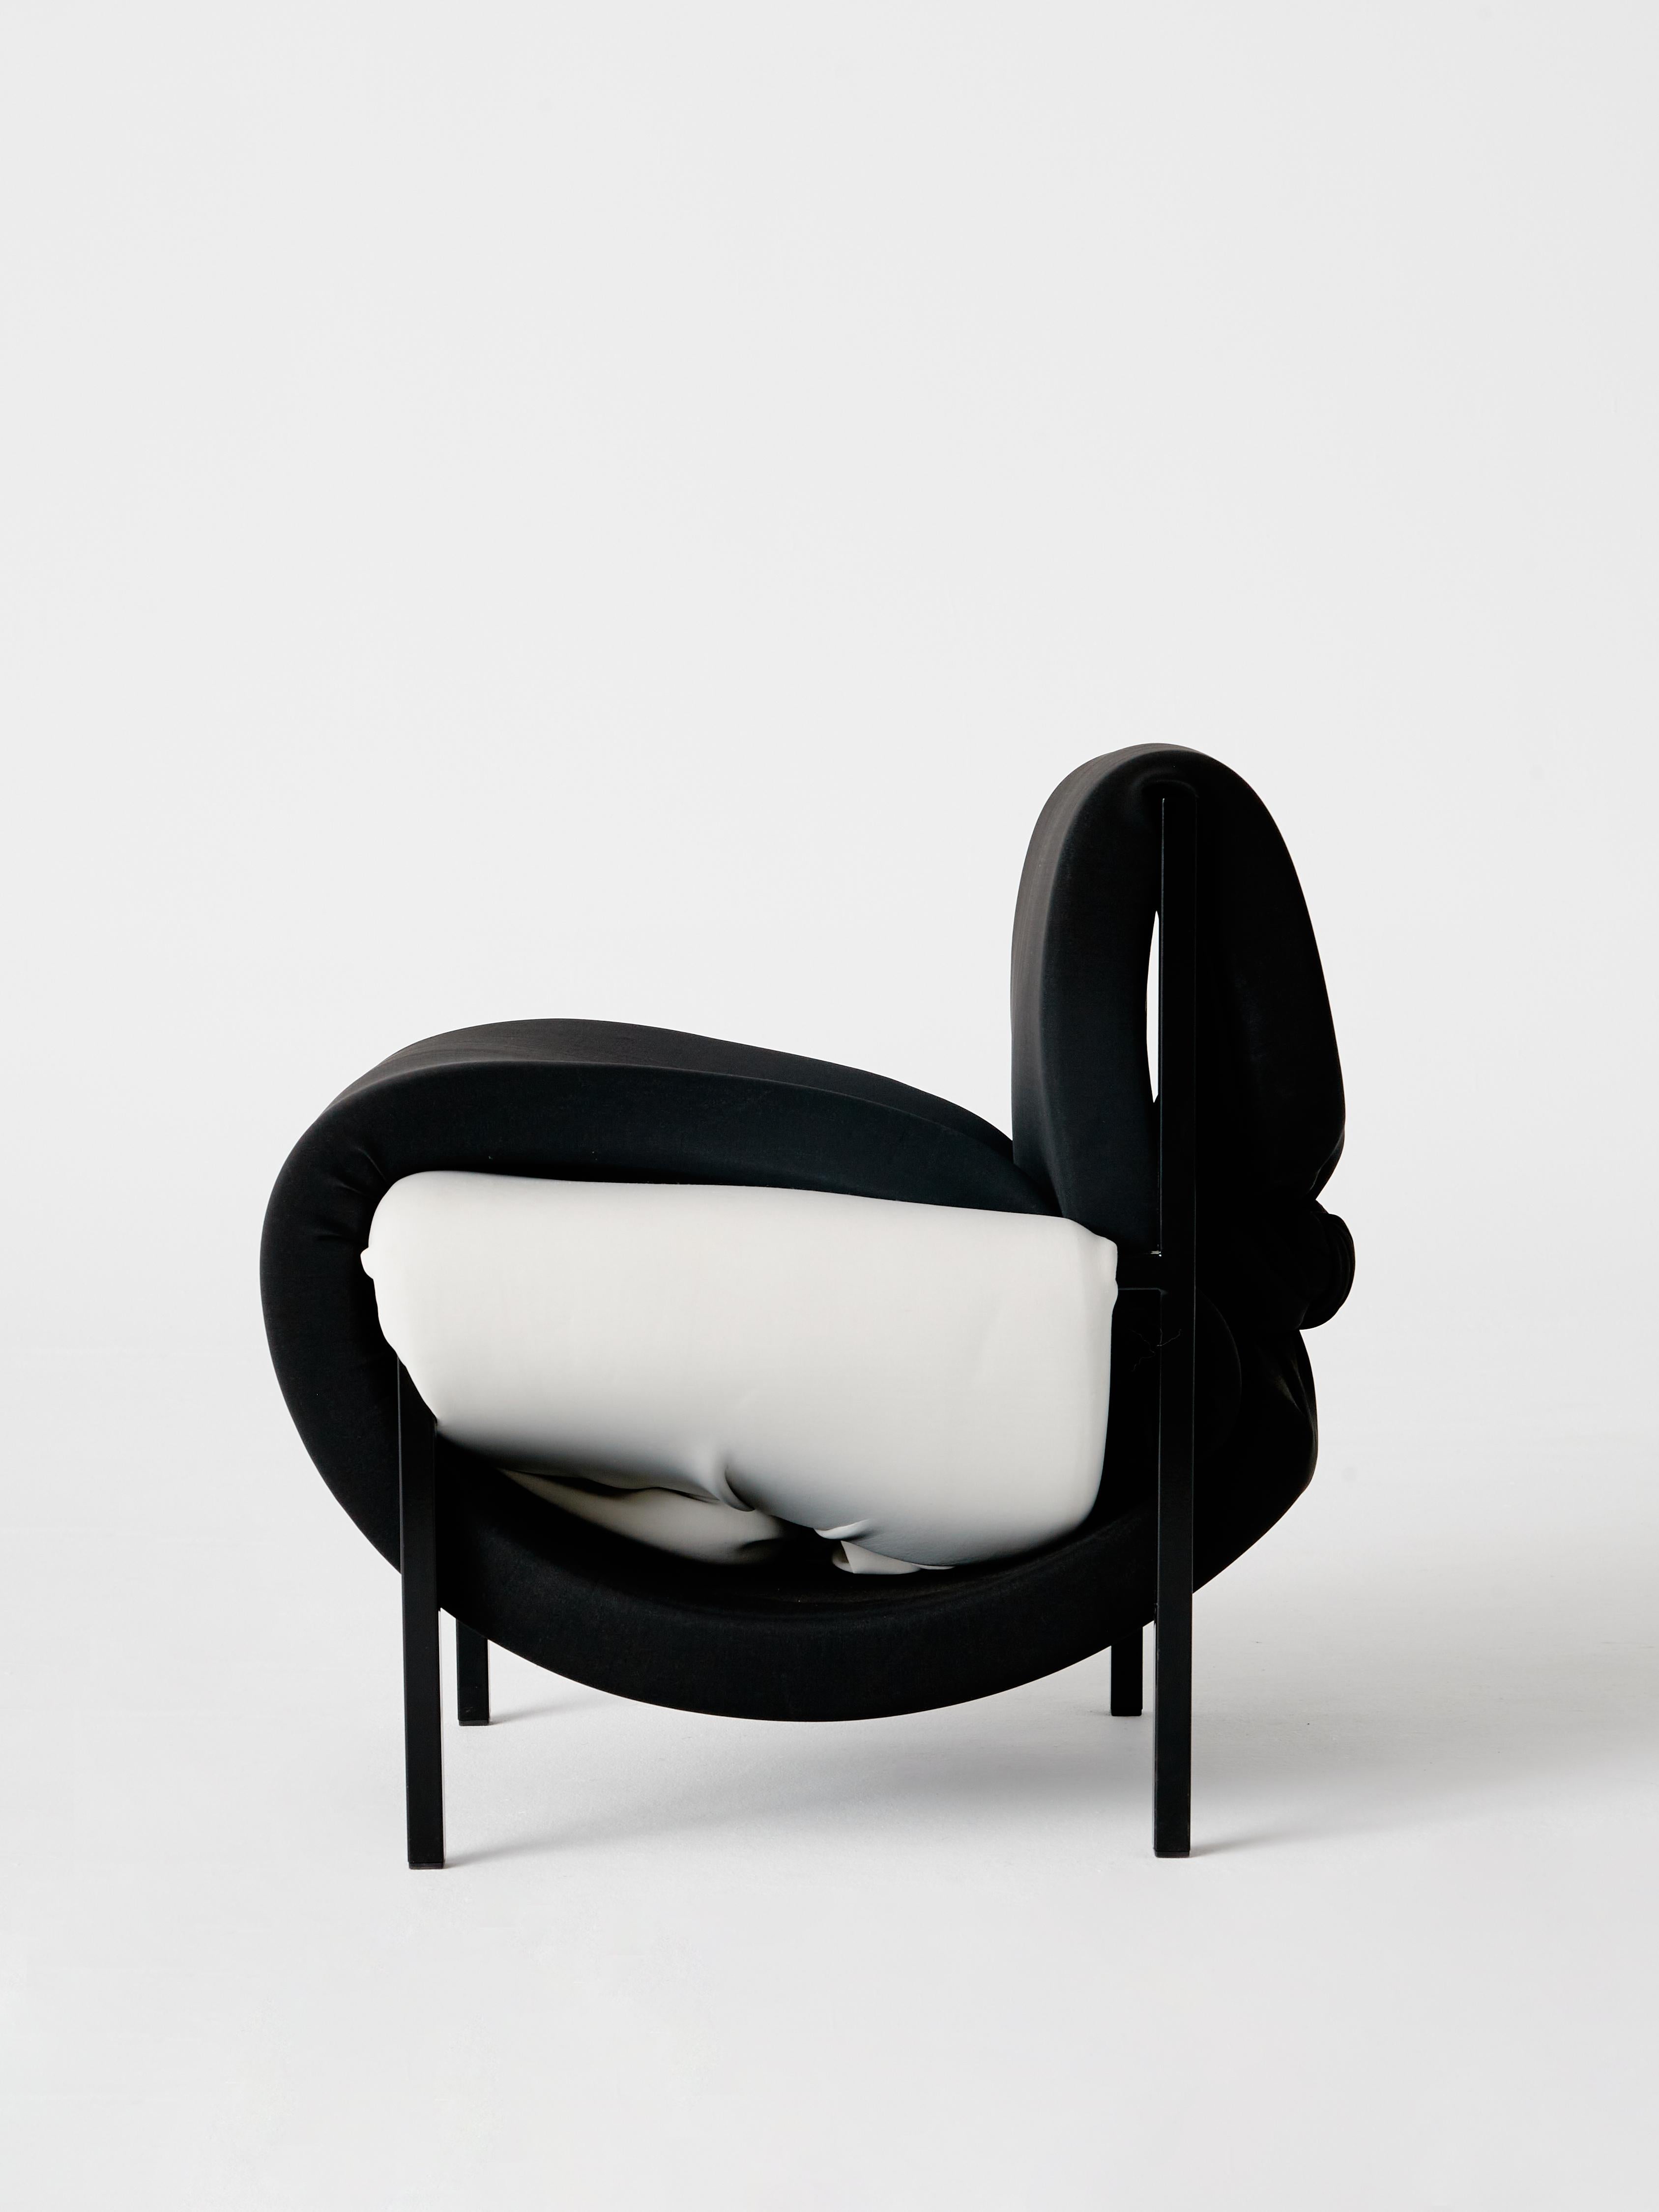 The F.C 01 chair is part of the collection Forma Curvas. It's described as 